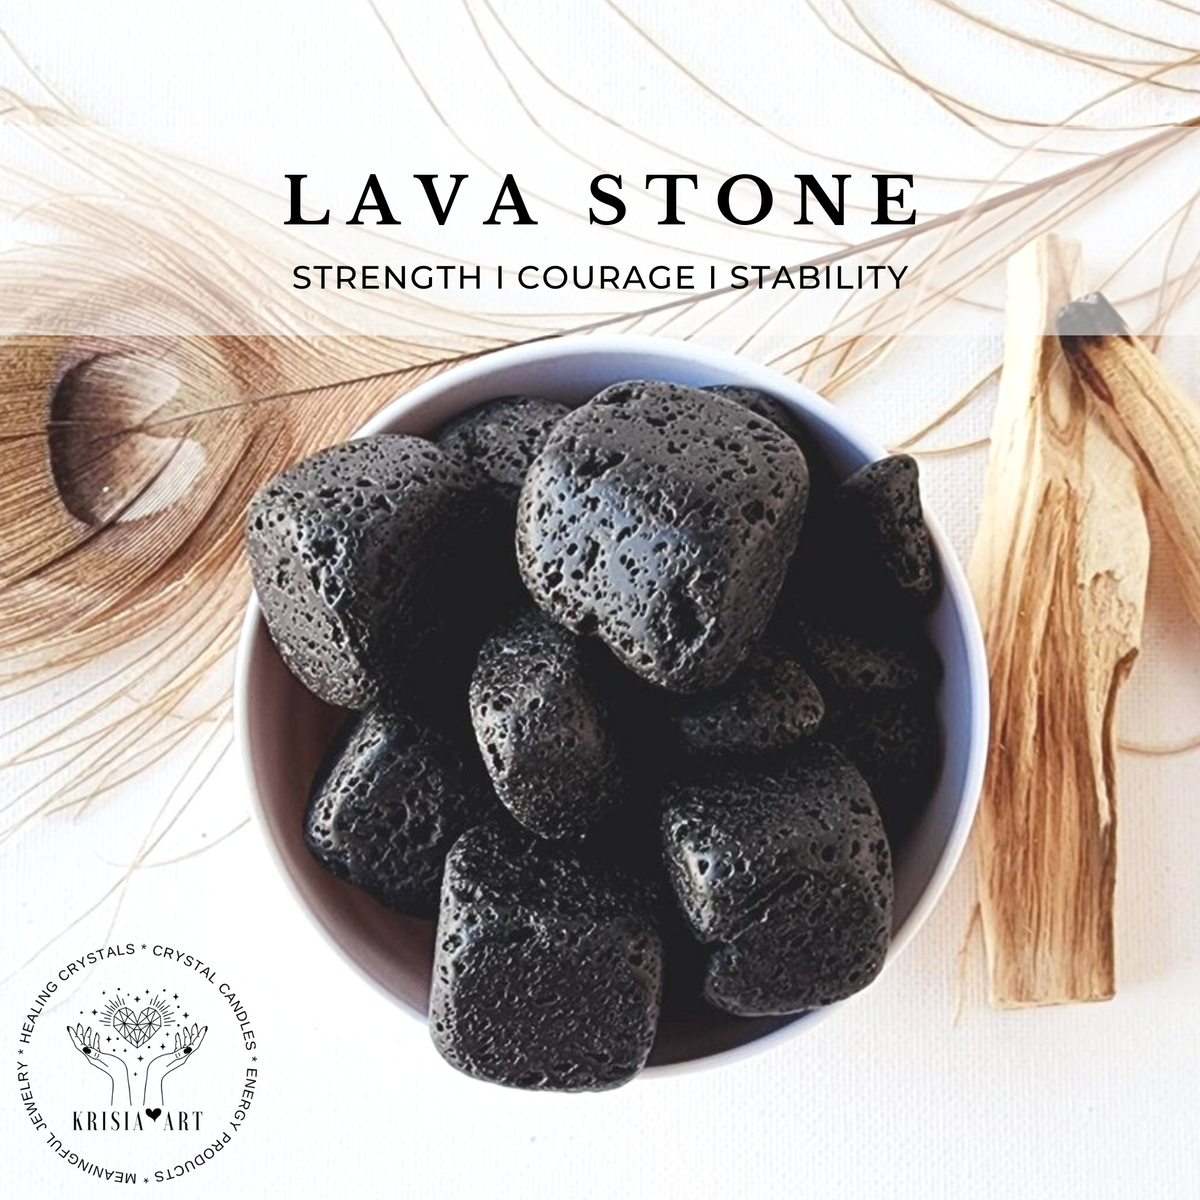 Black LAVA STONE tumbled stone, volcanic rock for strength, courage, stability reiki healing root chakra meditation